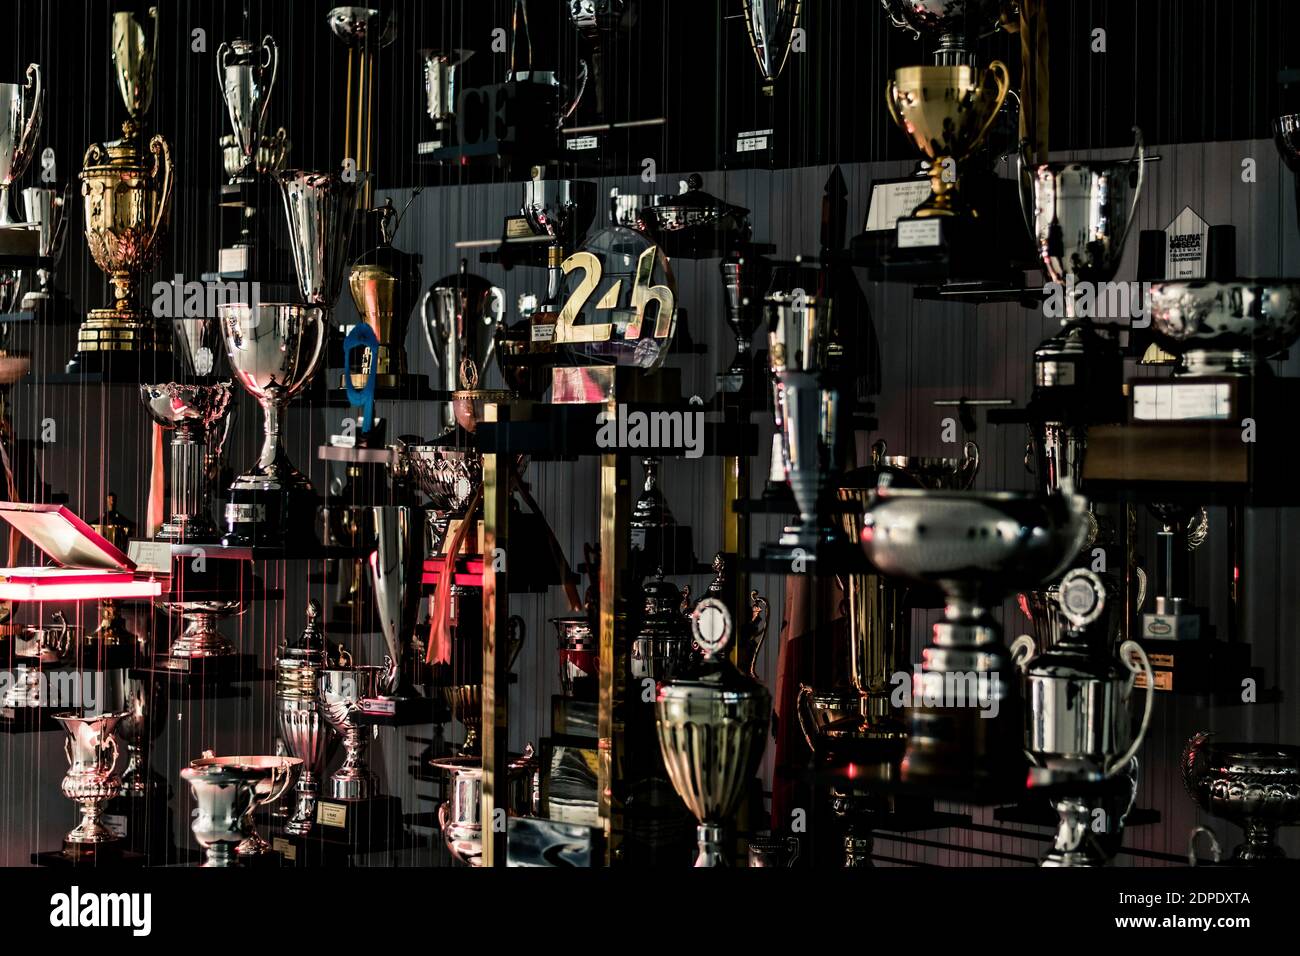 STUTTGART, Germany 6 March 2020: Champions Cups at The Porsche Museum. In the center a Le Mans 24 hours Race Cup can be seen. Stock Photo